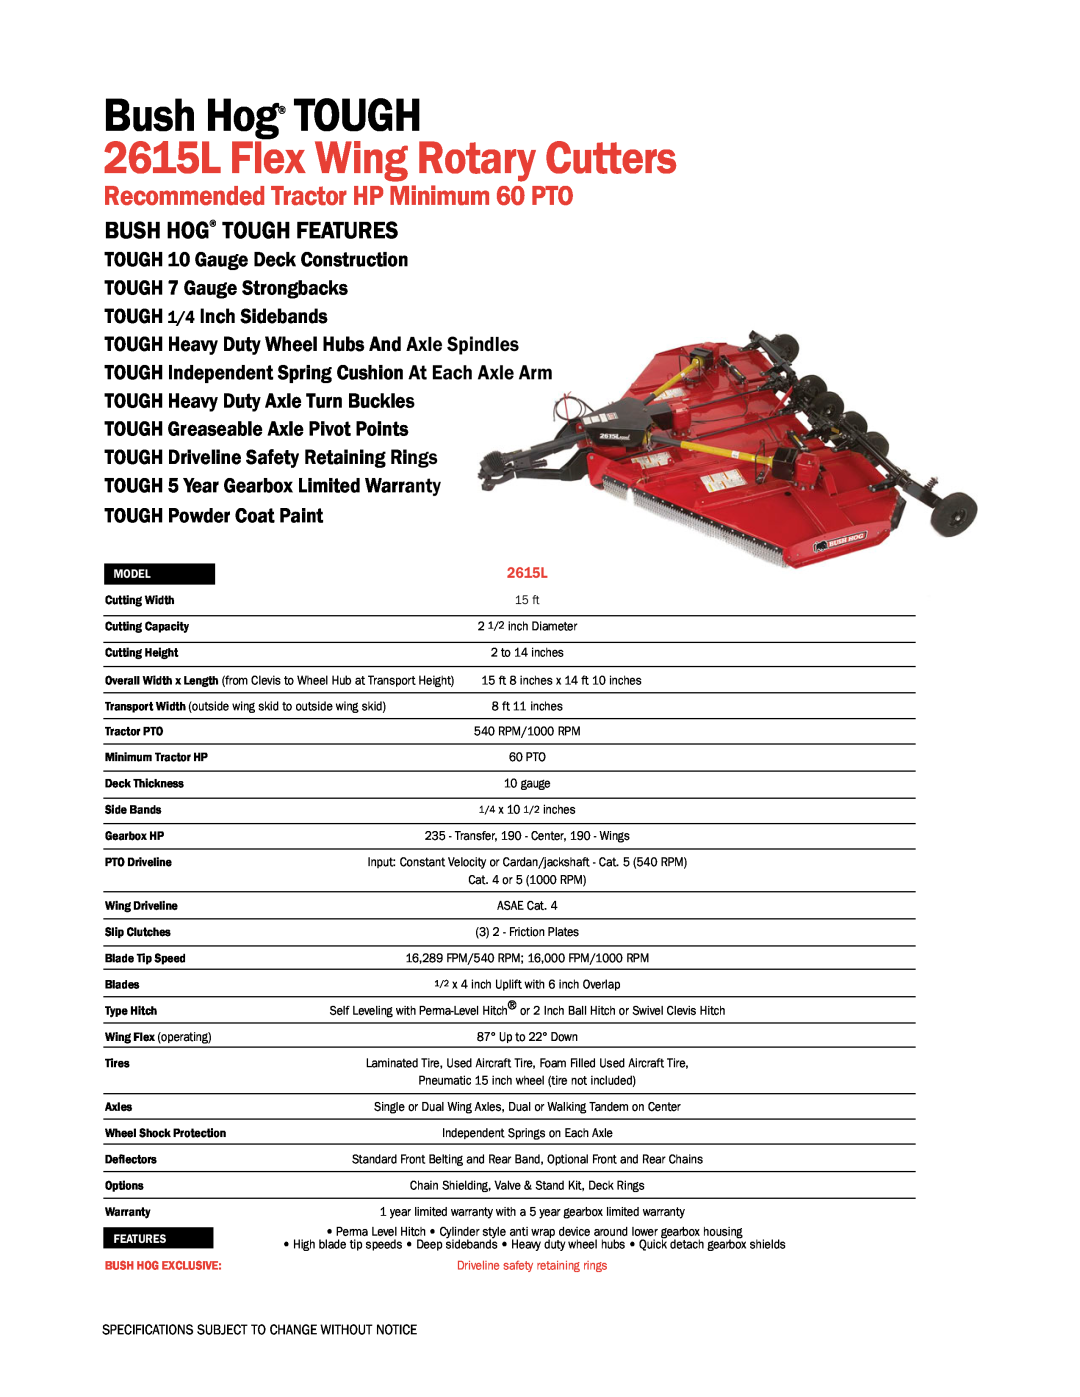 Bush Hog specifications Bush Hog TOUGH, 2615L Flex Wing Rotary Cutters, Recommended Tractor HP Minimum 60 PTO 